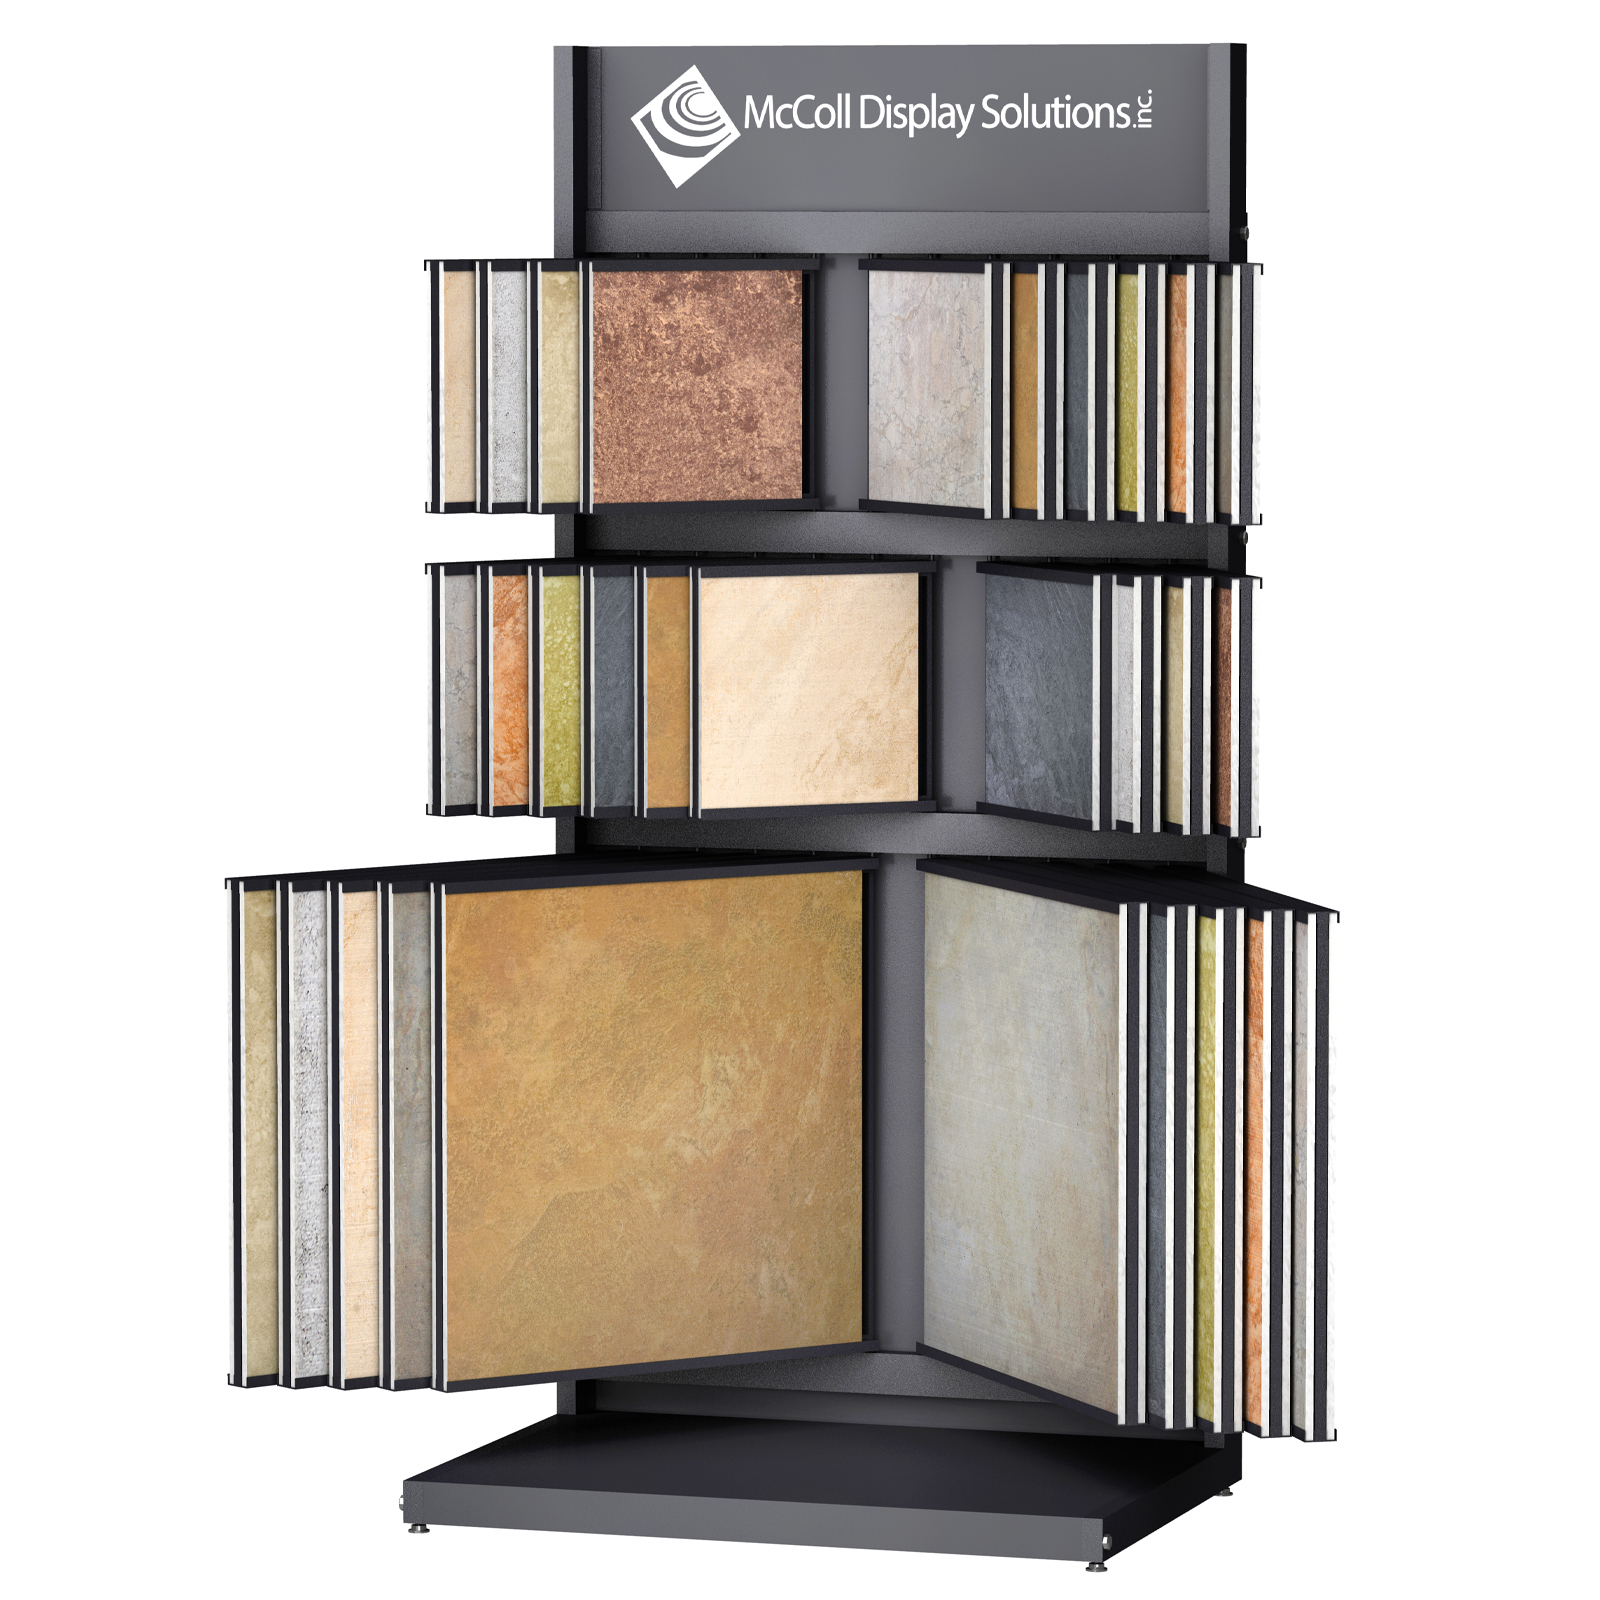 CD2010 Tower Wing Rack Ceramic Tile Stone Marble Quartz Channel System Showroom Display